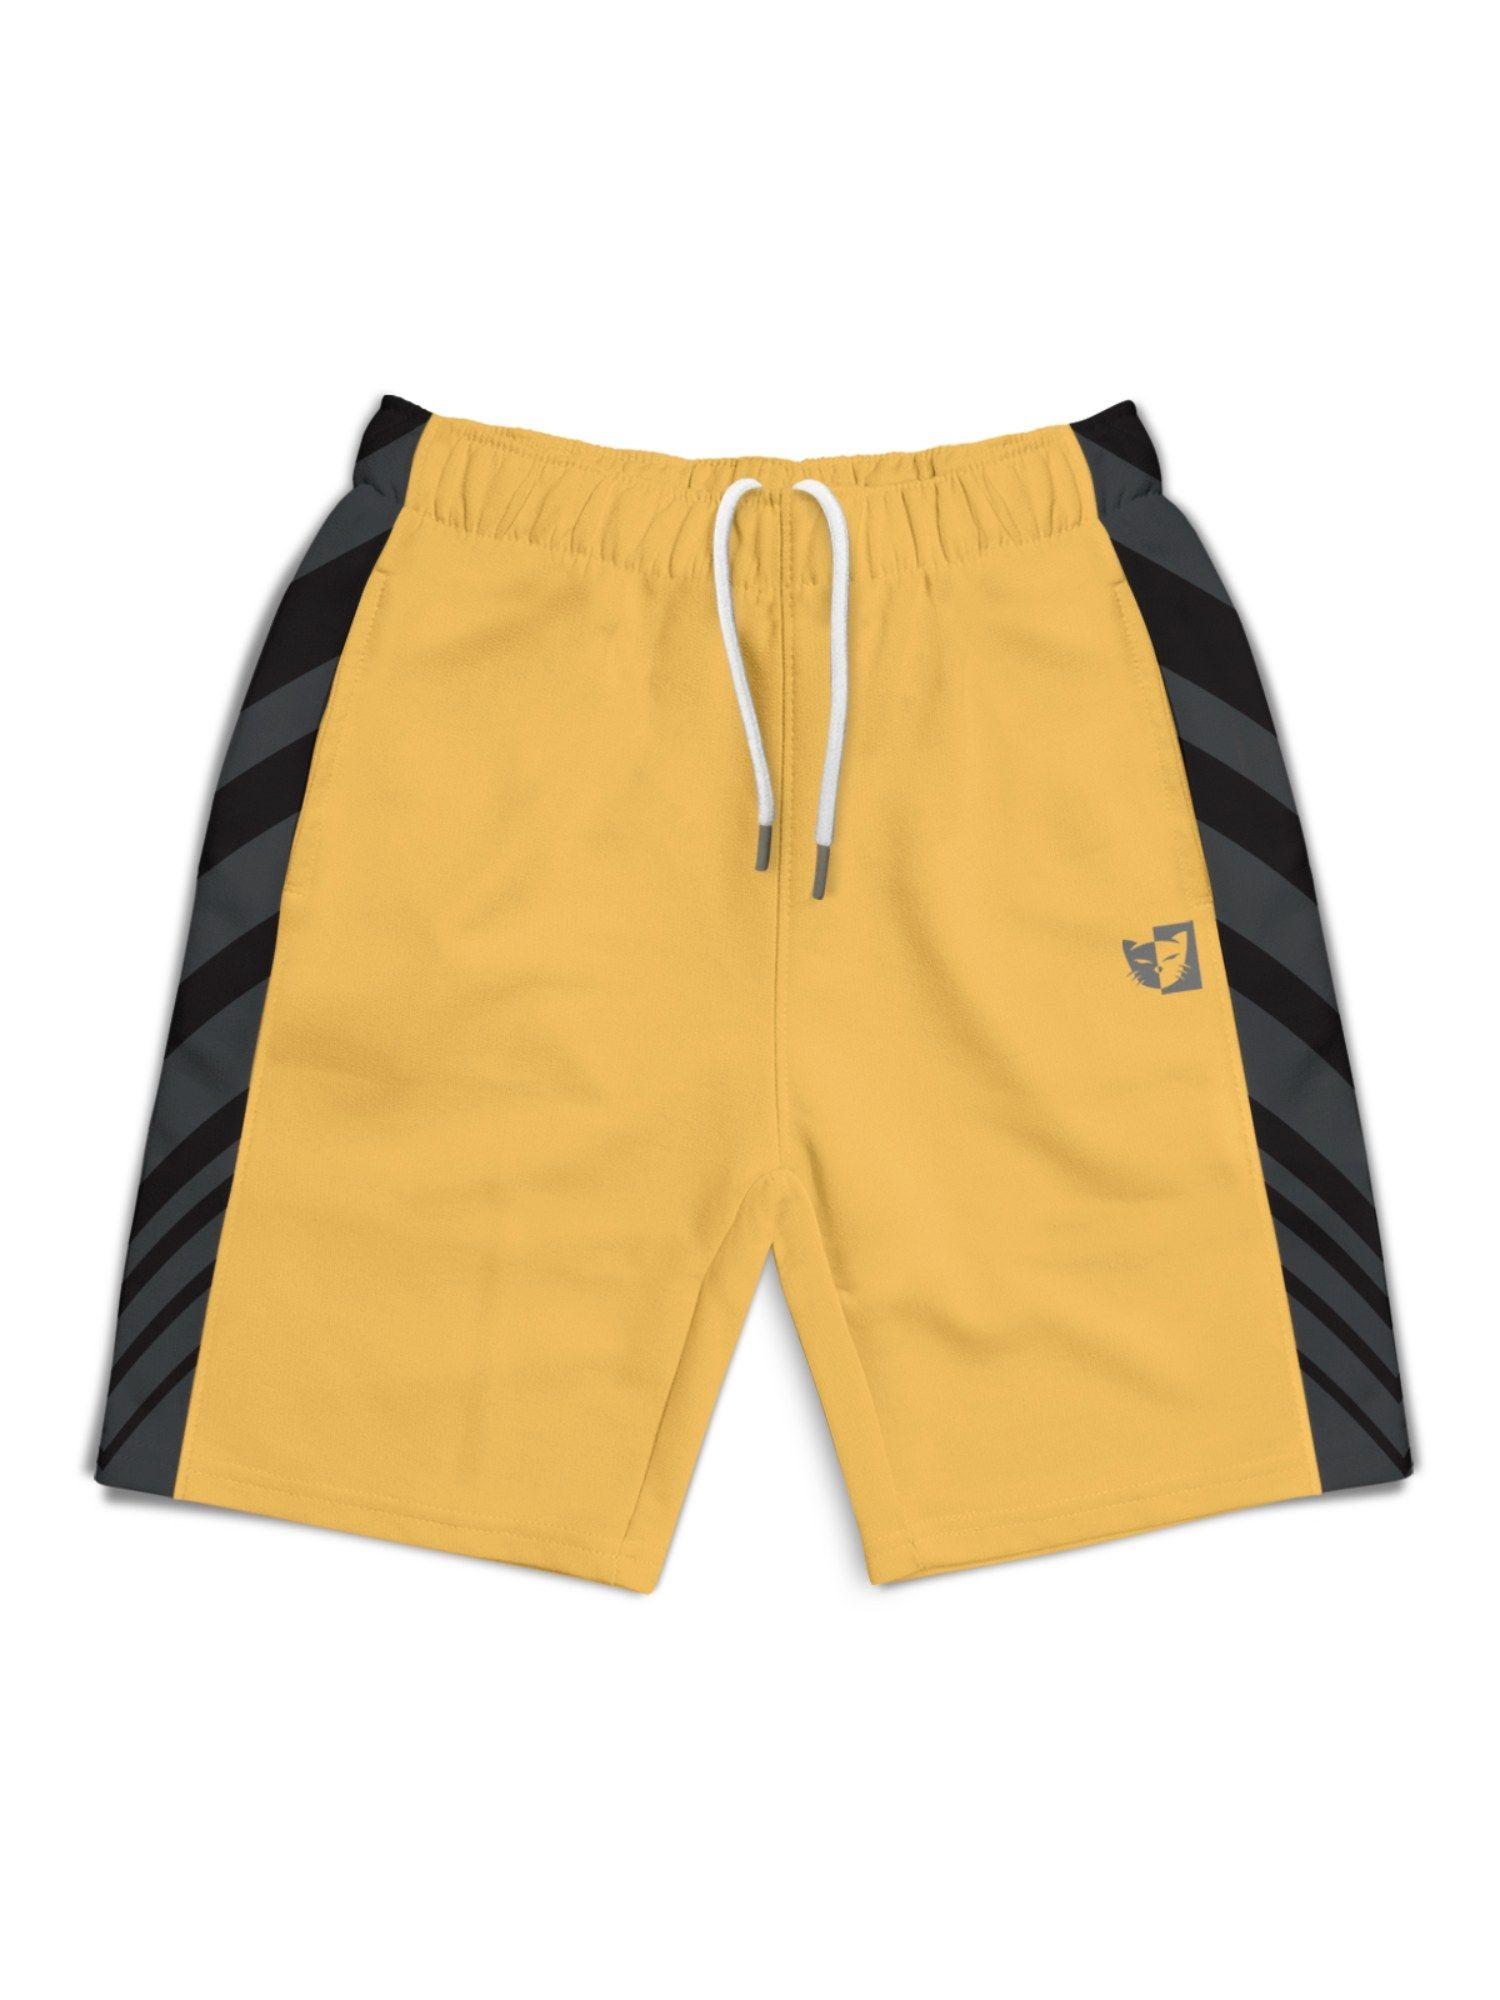 trendy-mustard-colorblock-with-branding-printed-shorts